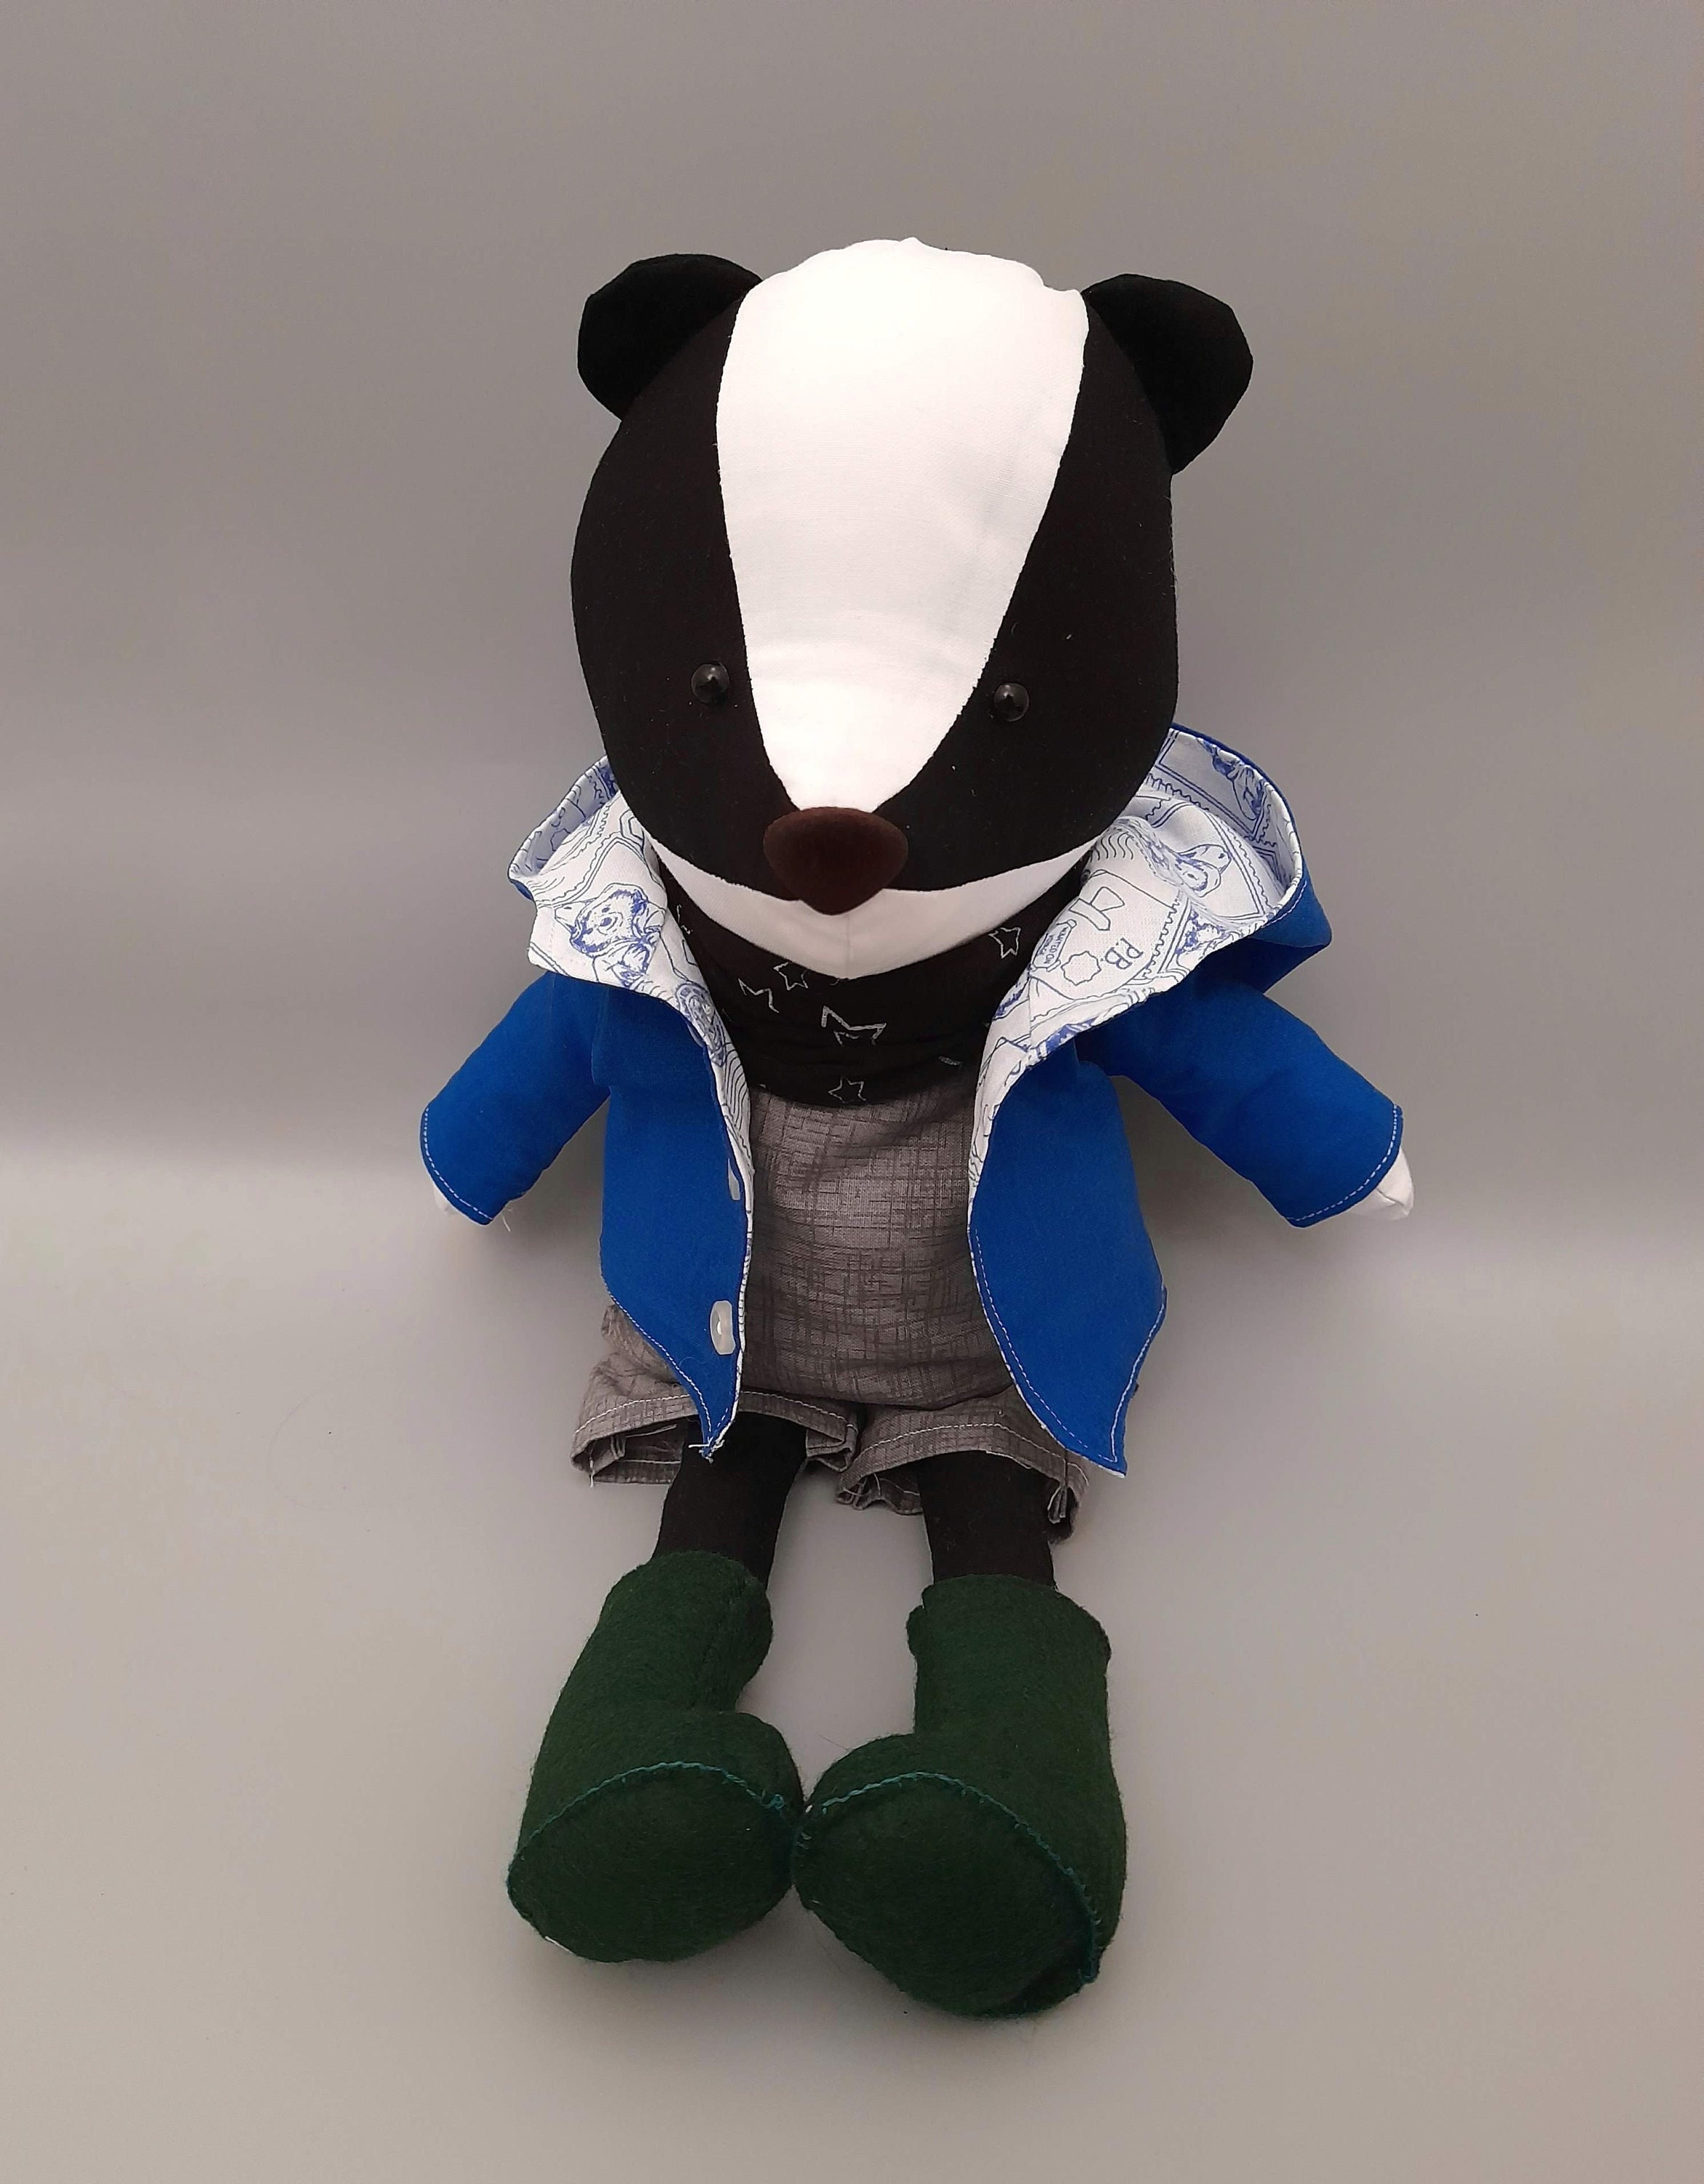 Stuffed Animal Badger with Jacket Sewing Pattern